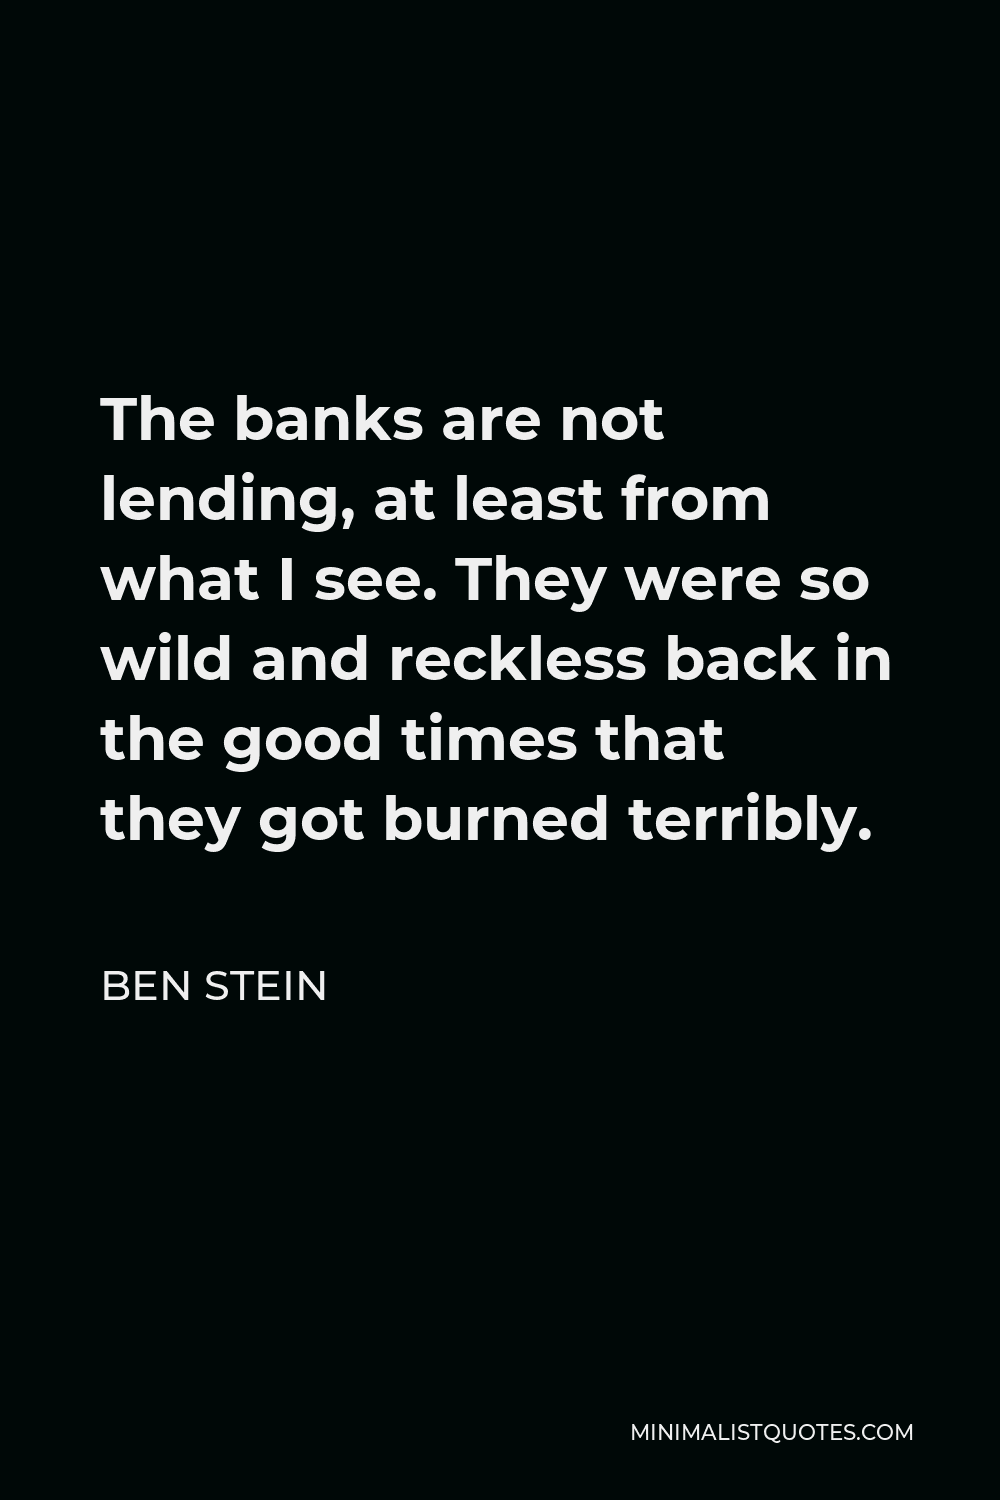 Ben Stein Quote - The banks are not lending, at least from what I see. They were so wild and reckless back in the good times that they got burned terribly.